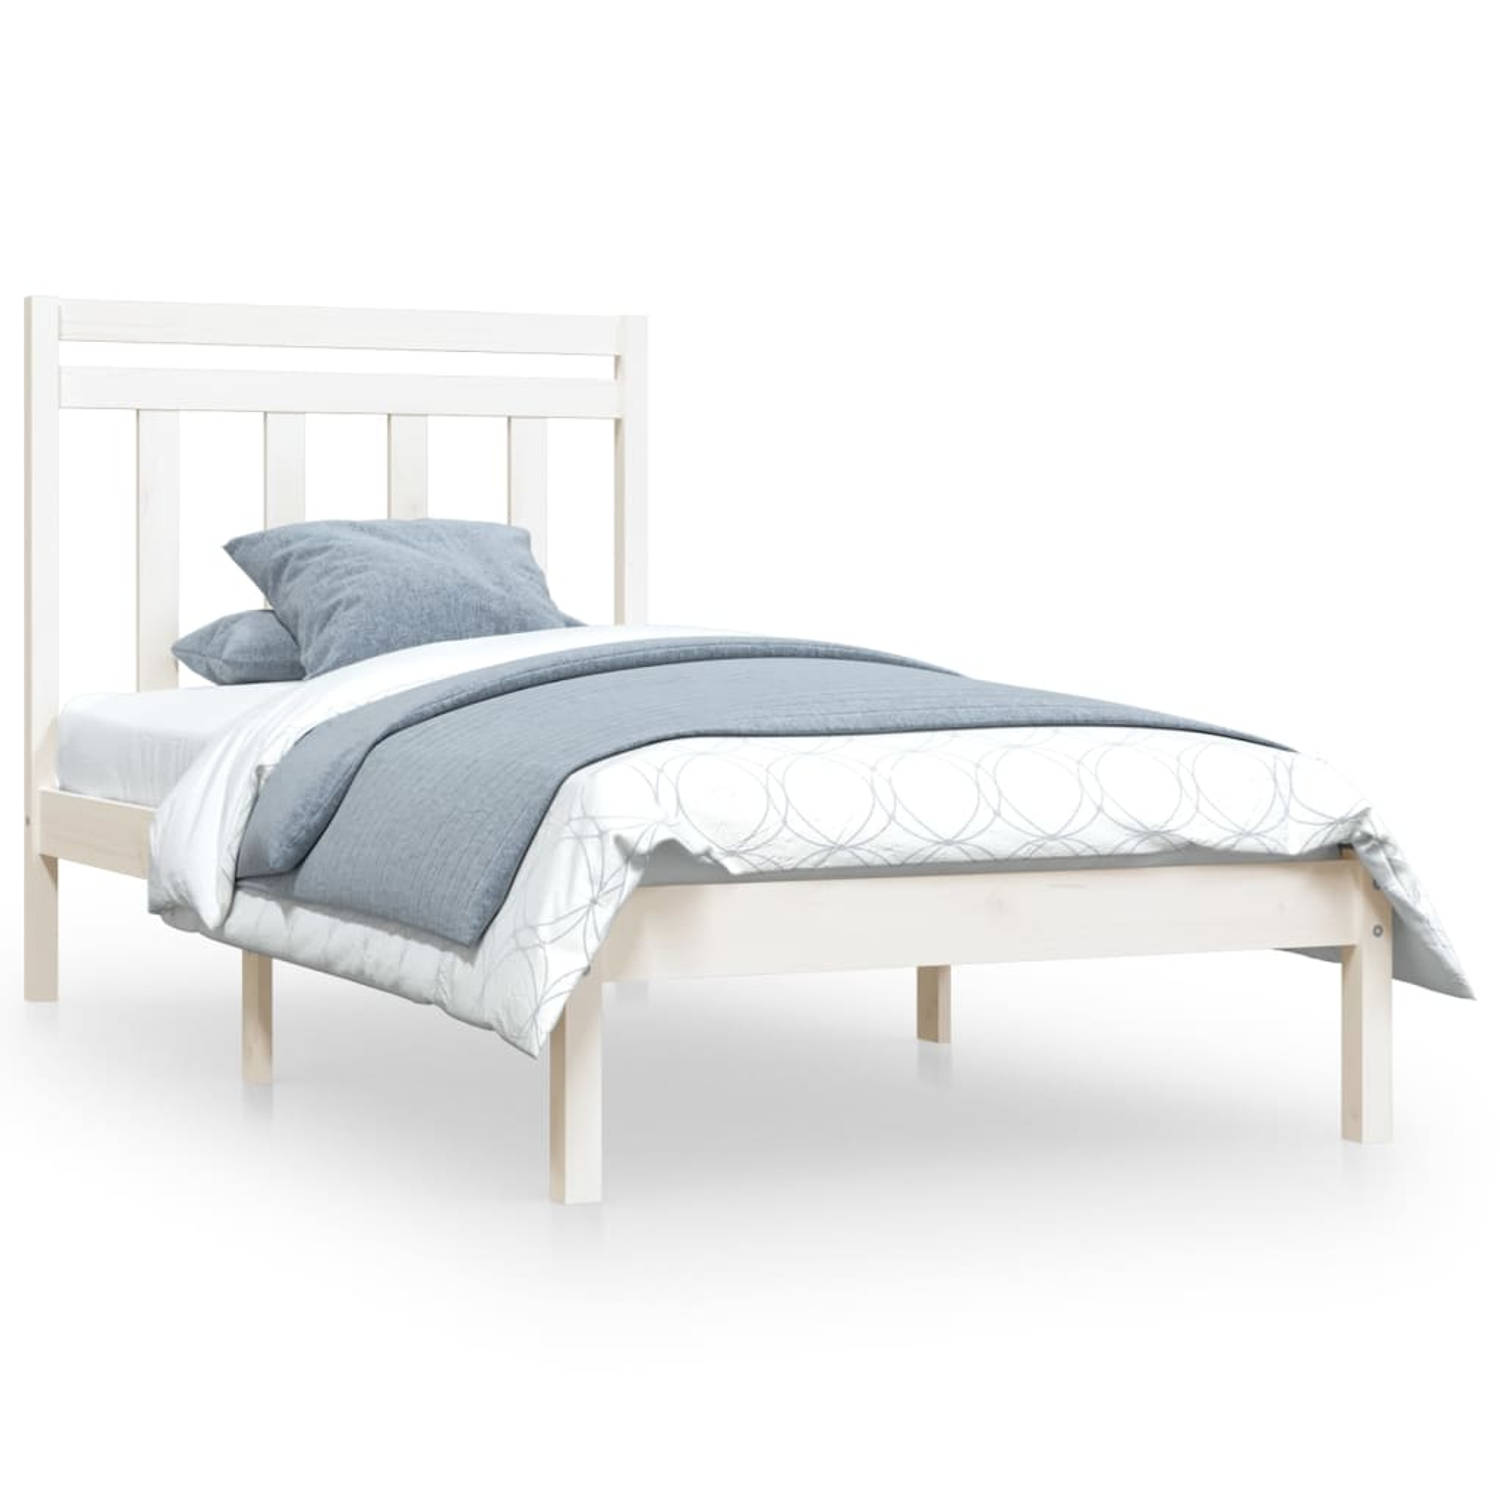 The Living Store Bedframe massief hout wit 100x200 cm - Bedframe - Bedframes - Eenpersoonsbed - Bed - Bedombouw - Ledikant - Houten Bedframe - Eenpersoonsbedden - Bedden - Bedombou